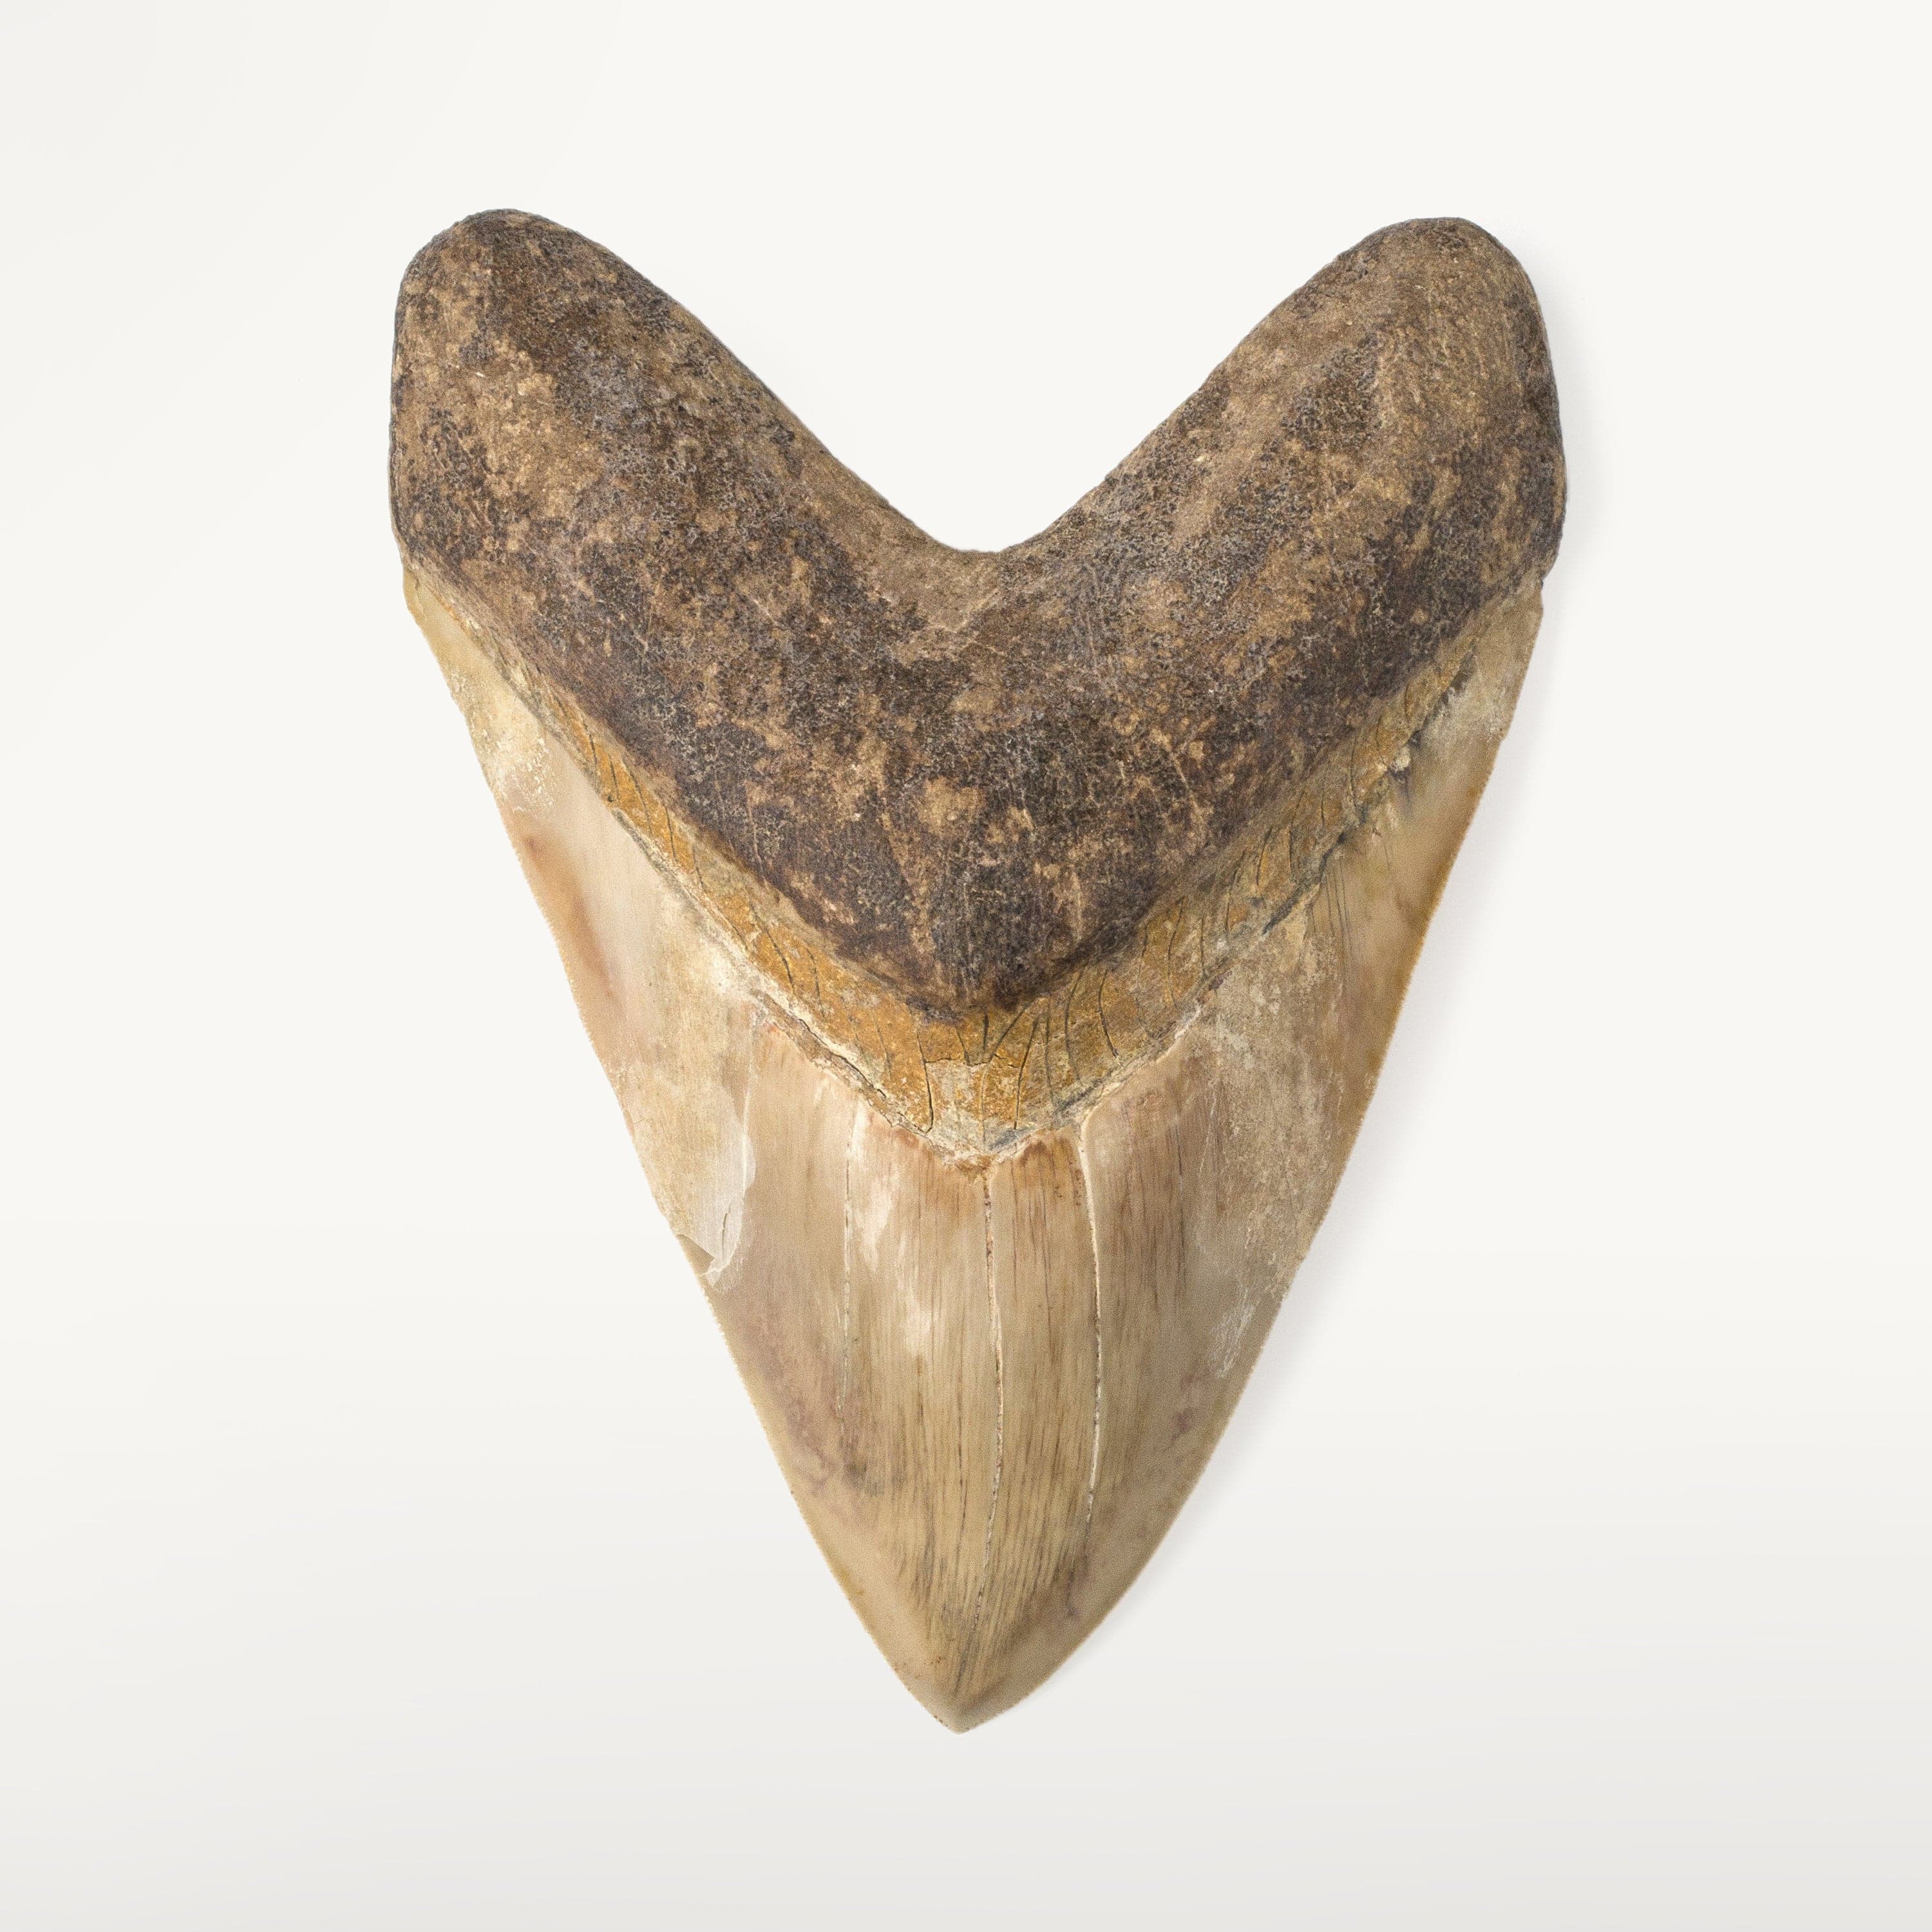 Kalifano Megalodon Teeth Natural Megalodon Tooth from Indonesia - 6.5" ST25000.002